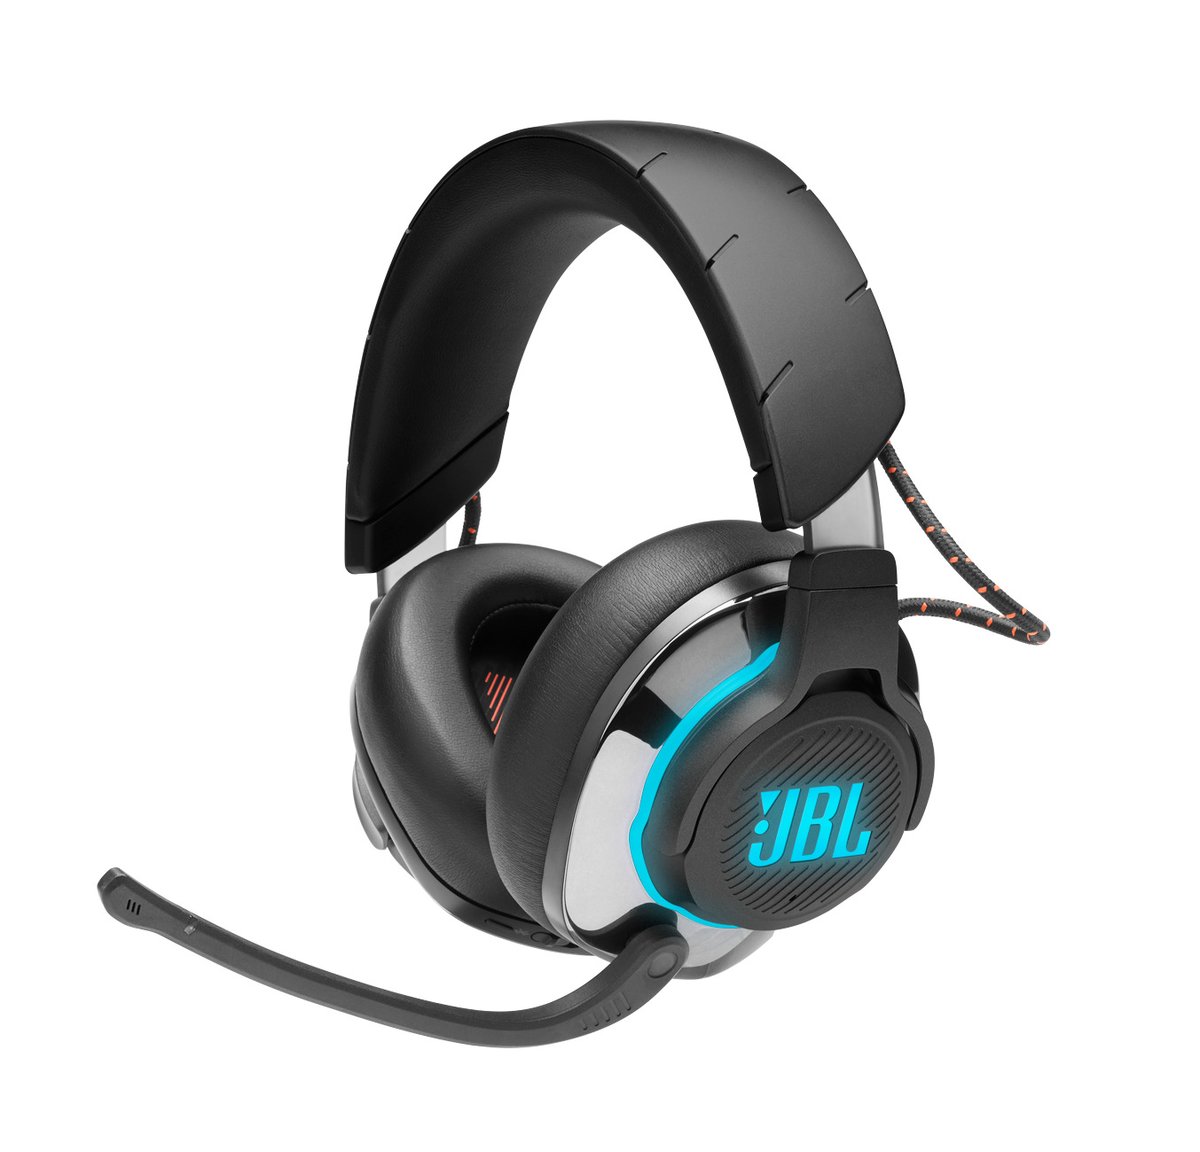 A pair of JBL gaming headphones for our Father's Day gift guide.